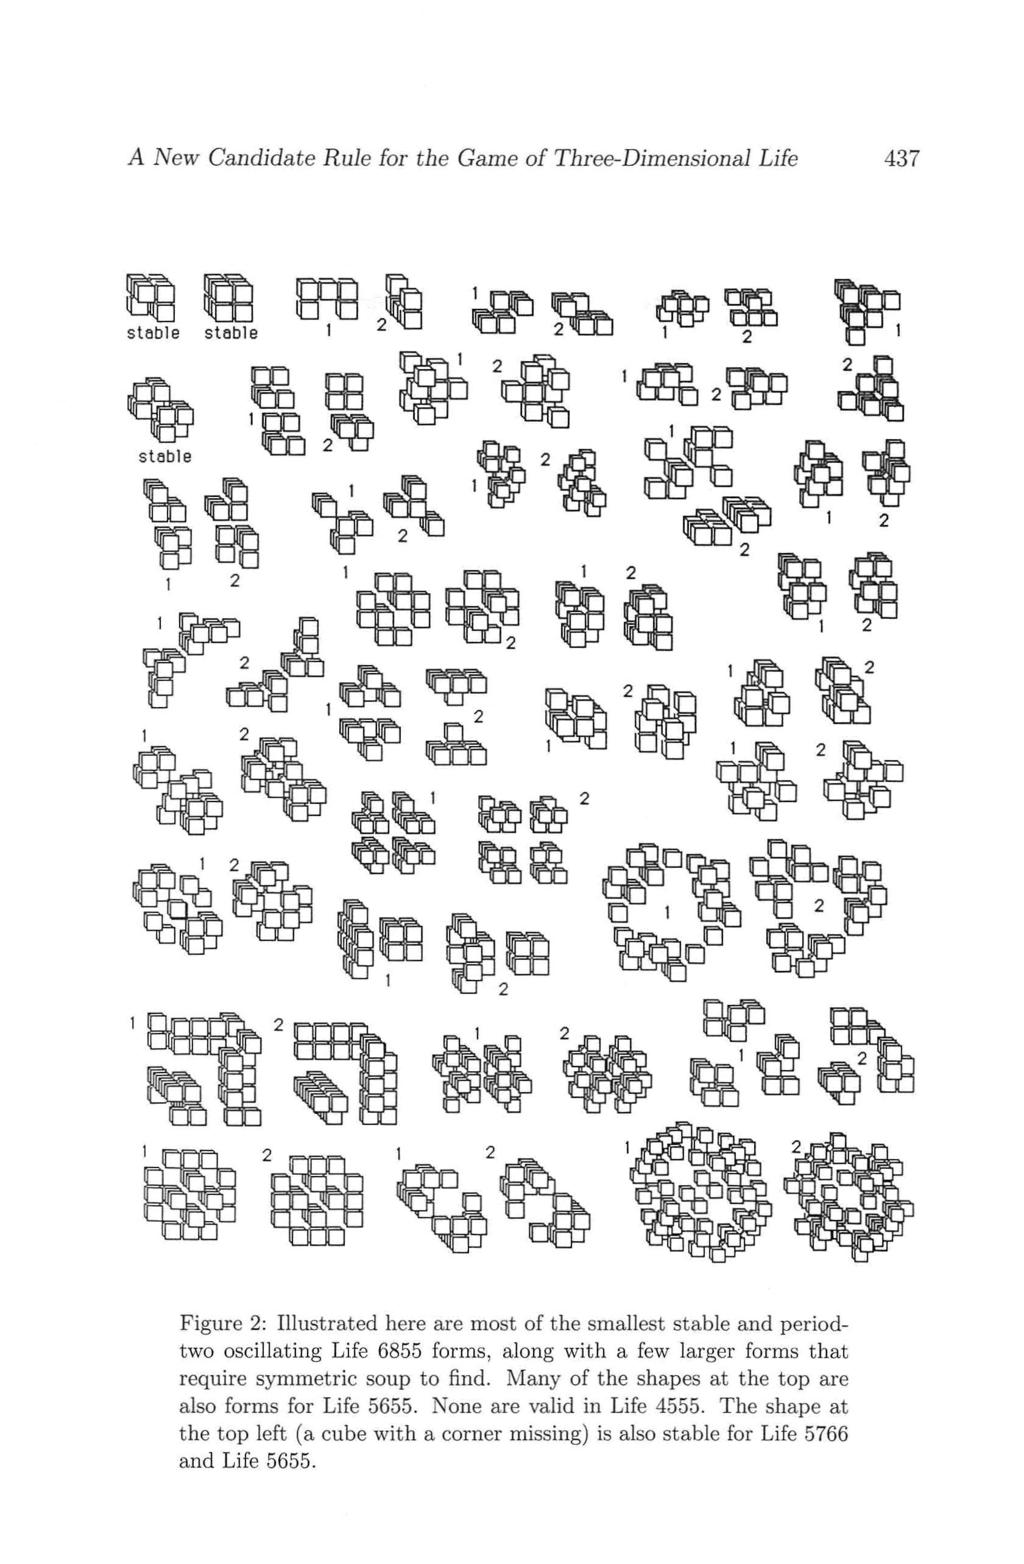 A New Candidate R ule for the Game of Three-Dimensional Life 437 Figure 2: Illustrated here are most of the smallest st able and periodtwo oscillati ng Life 6855 forms, along with a few larger forms